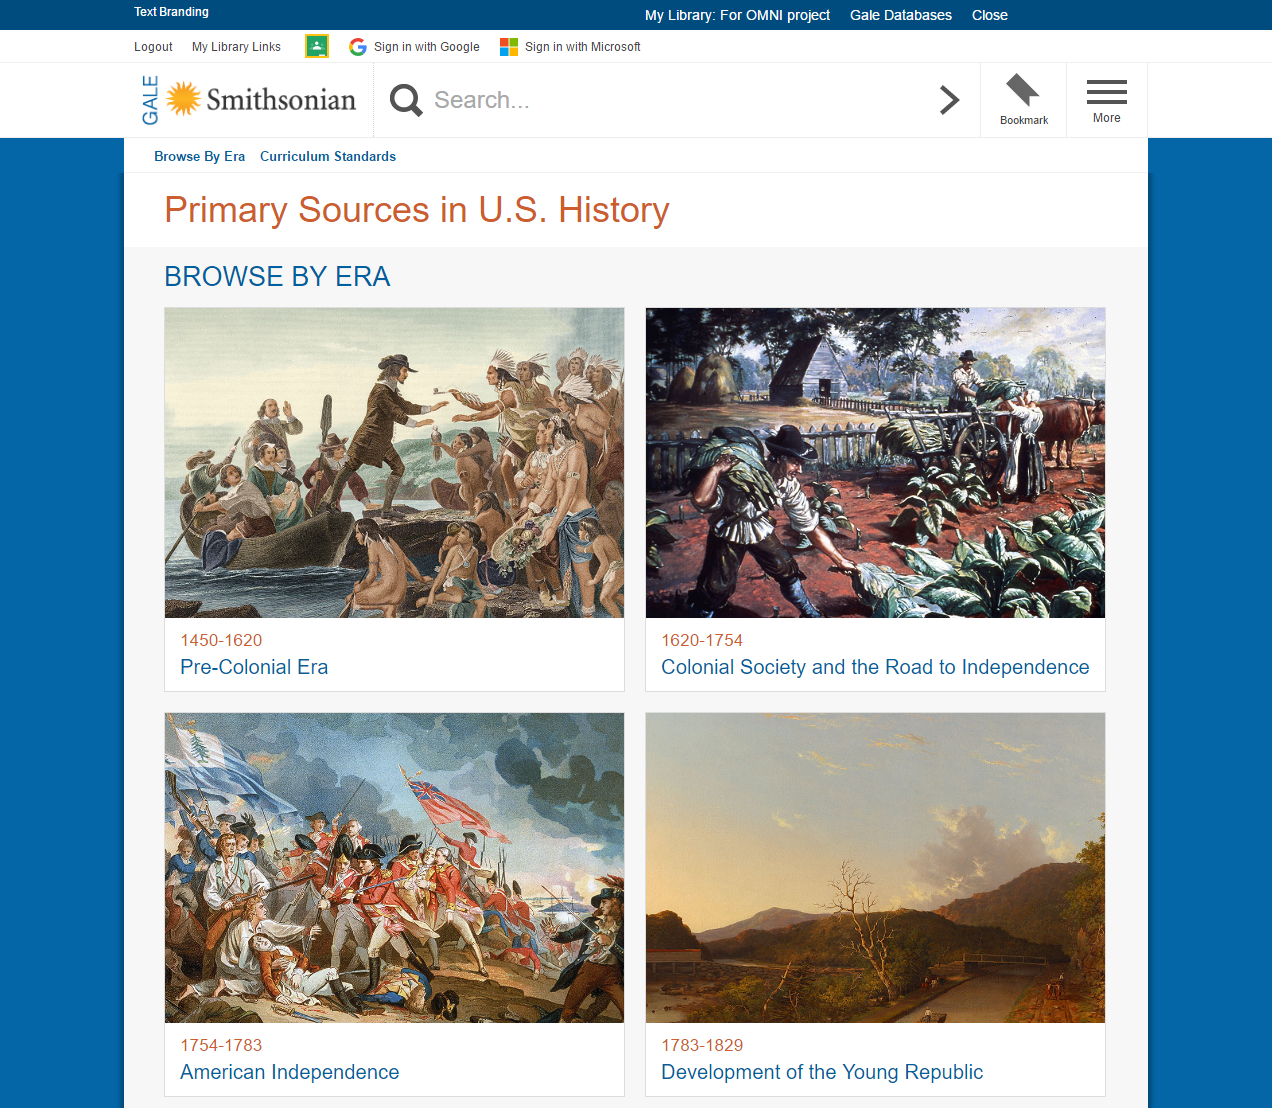 Browse eras or search for primary sources from the home page.